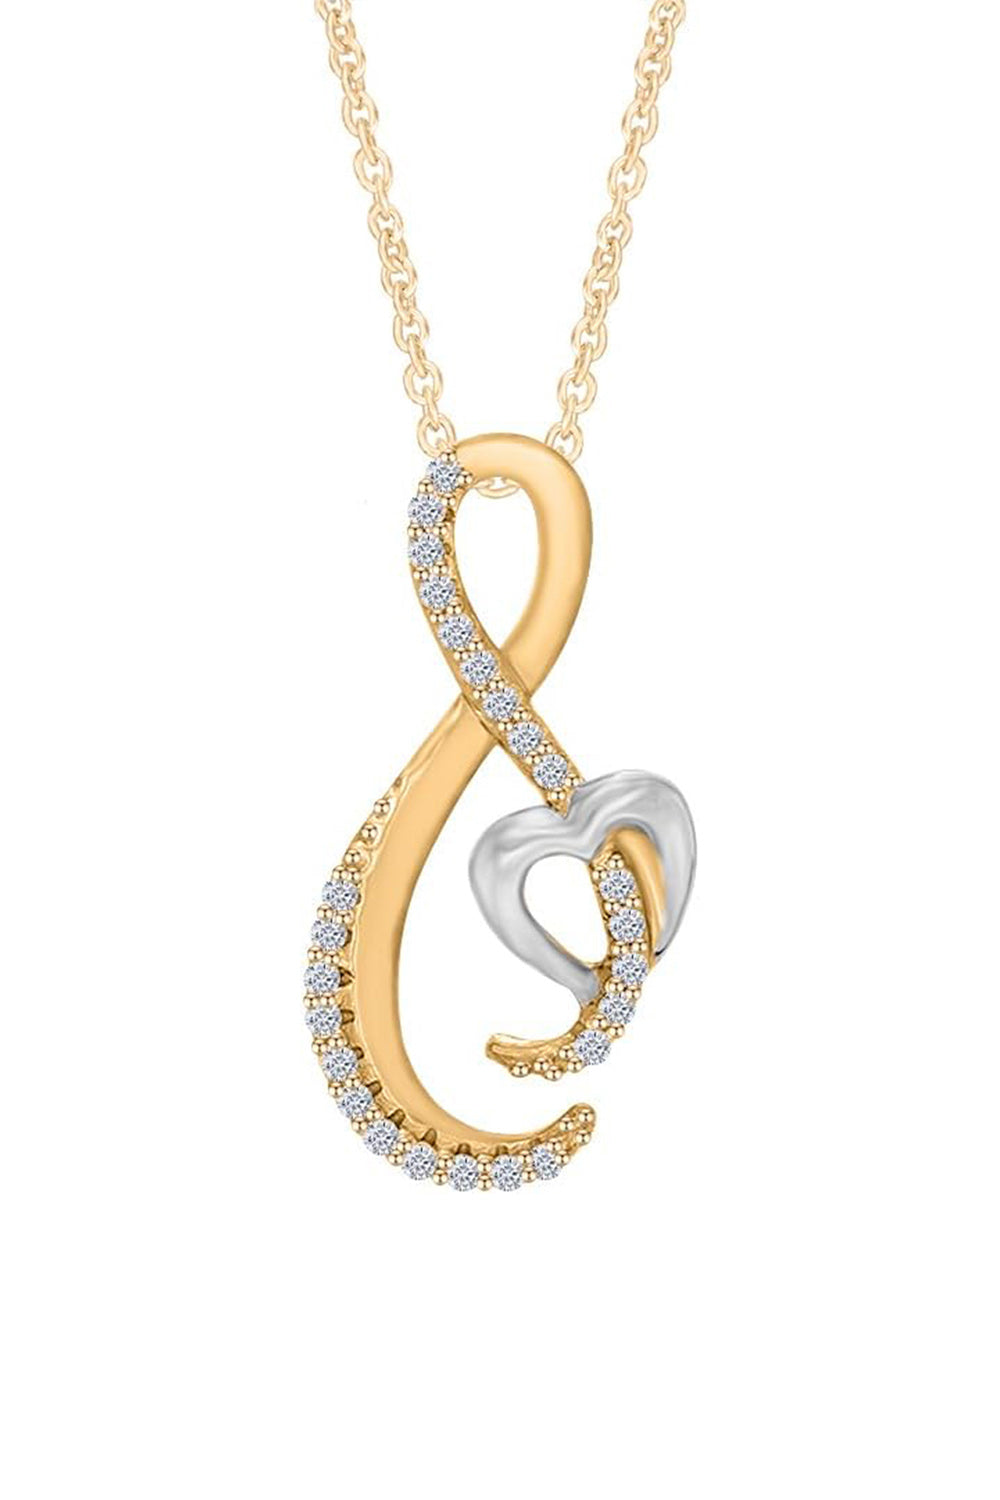 Yellow Gold Color Moissanite Infinity Heart Pendant Necklace